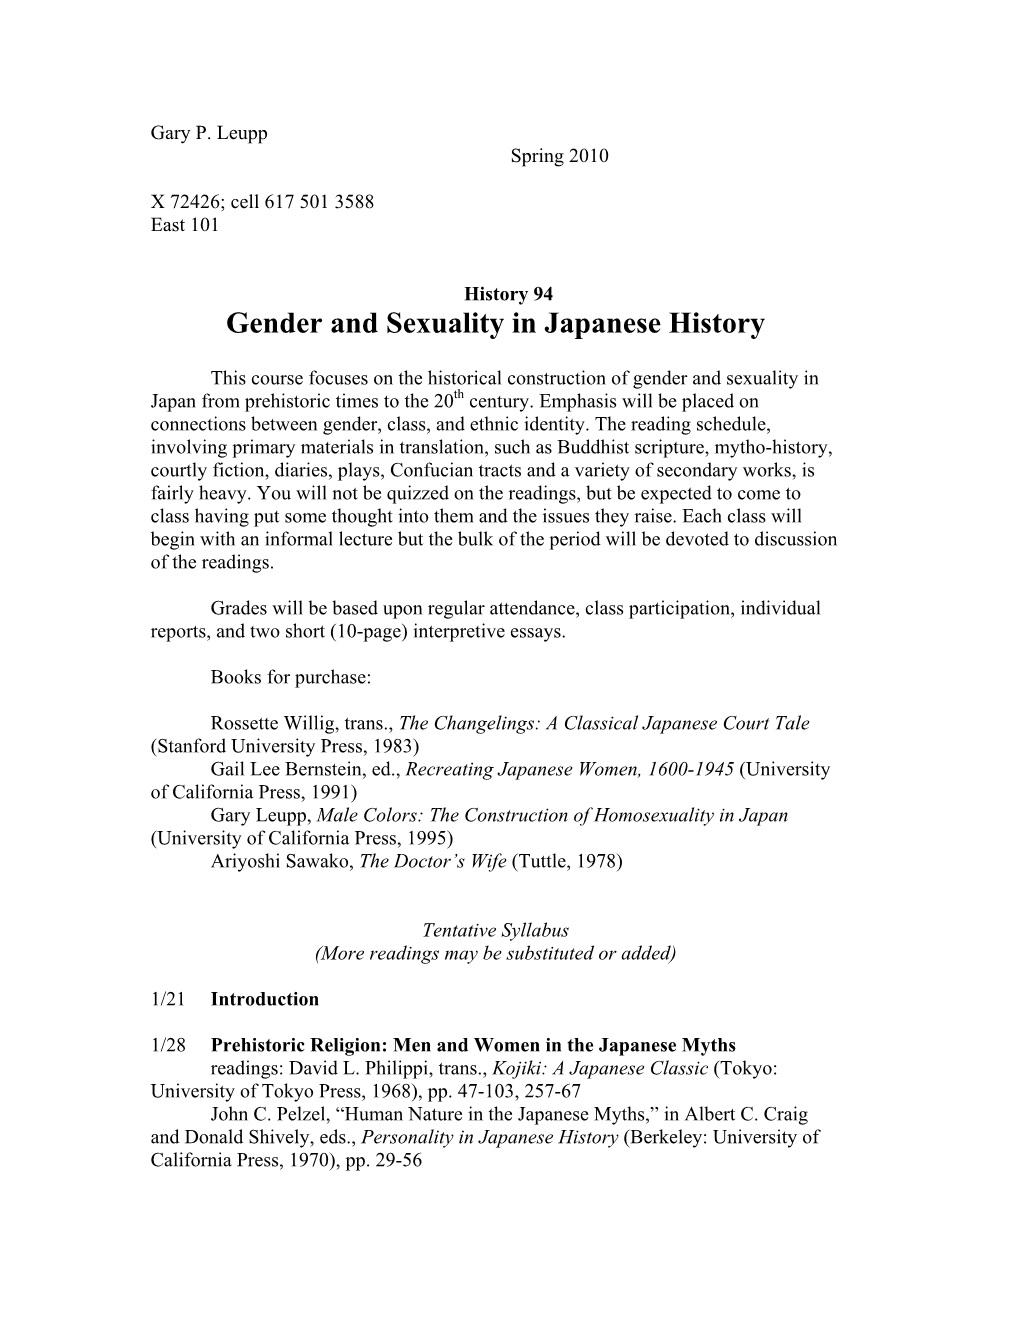 Gender and Sexuality in Japanese History